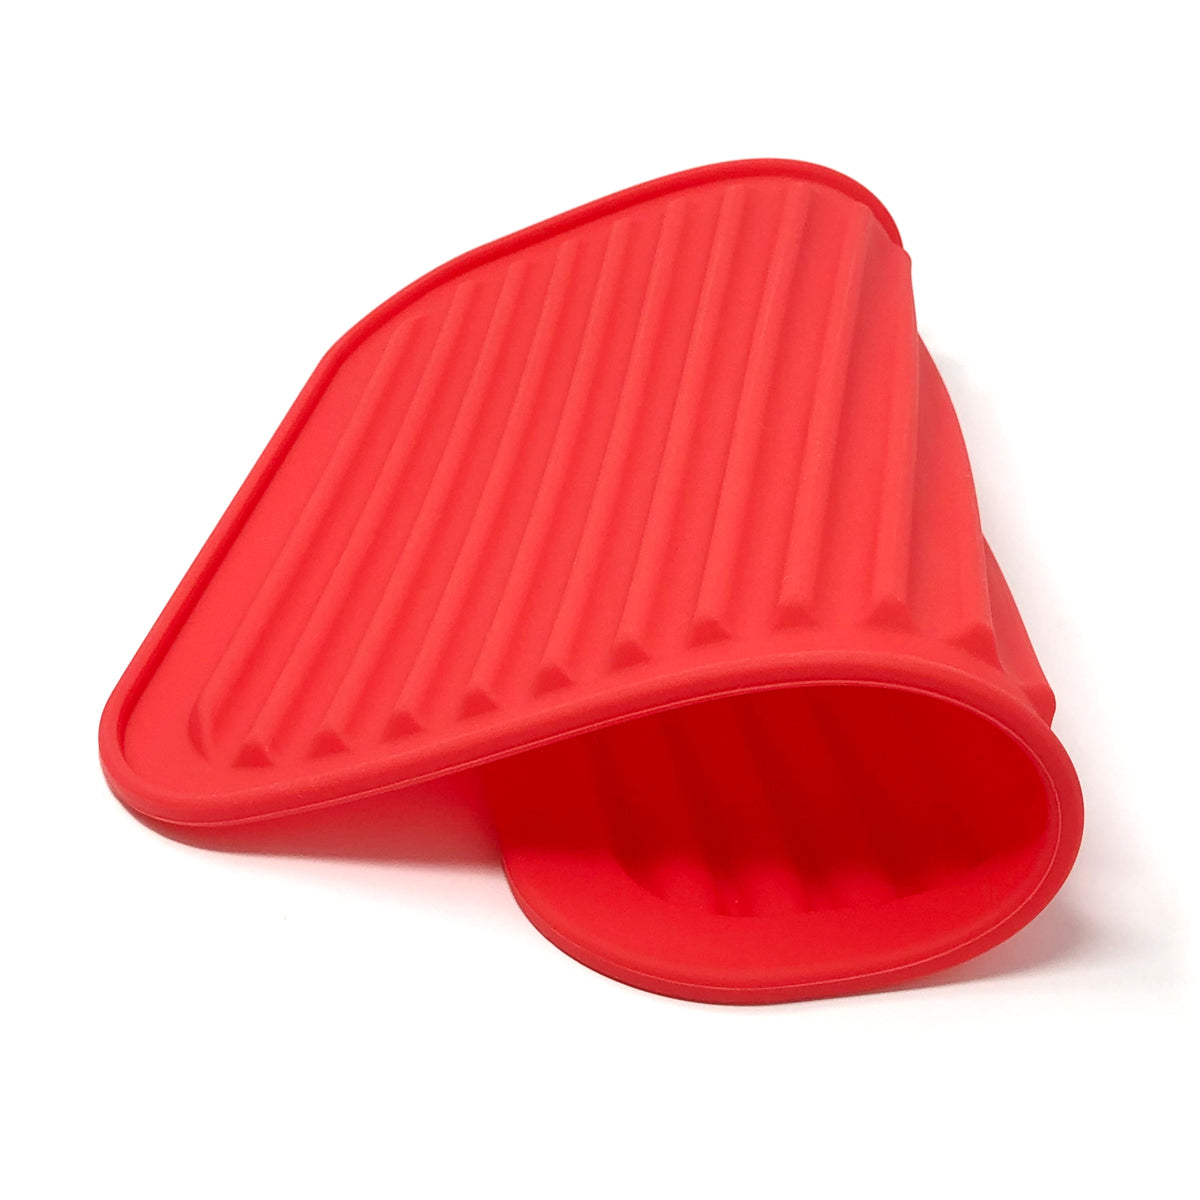 Wrapables Silicone Trivet, Multi-Use Durable Flexible Non-Slip Insulated Silicone Mat (Set of 2) Red